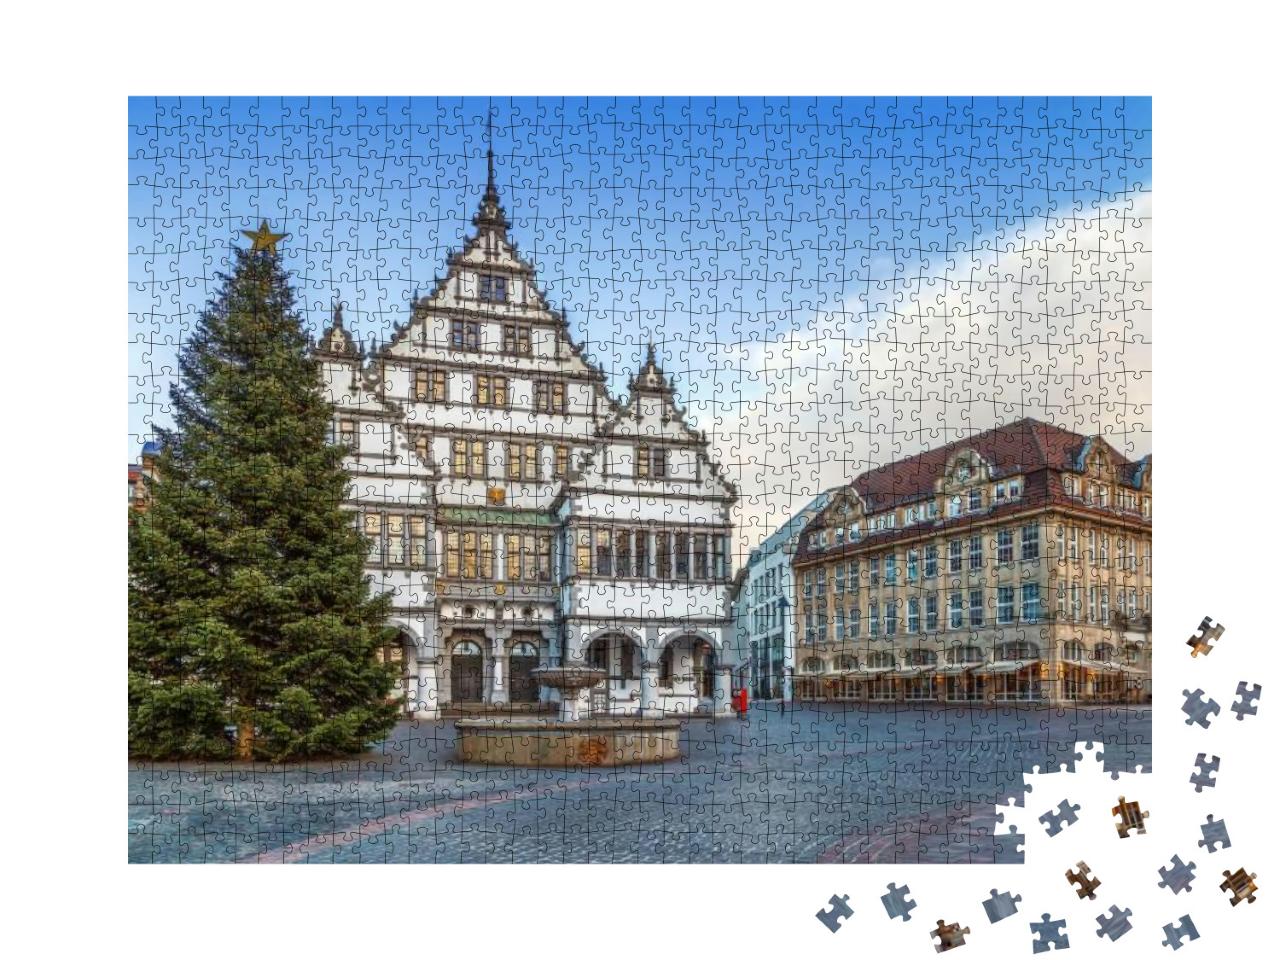 Renaissance Town Hall Was Constructed in 1616 on Square i... Jigsaw Puzzle with 1000 pieces